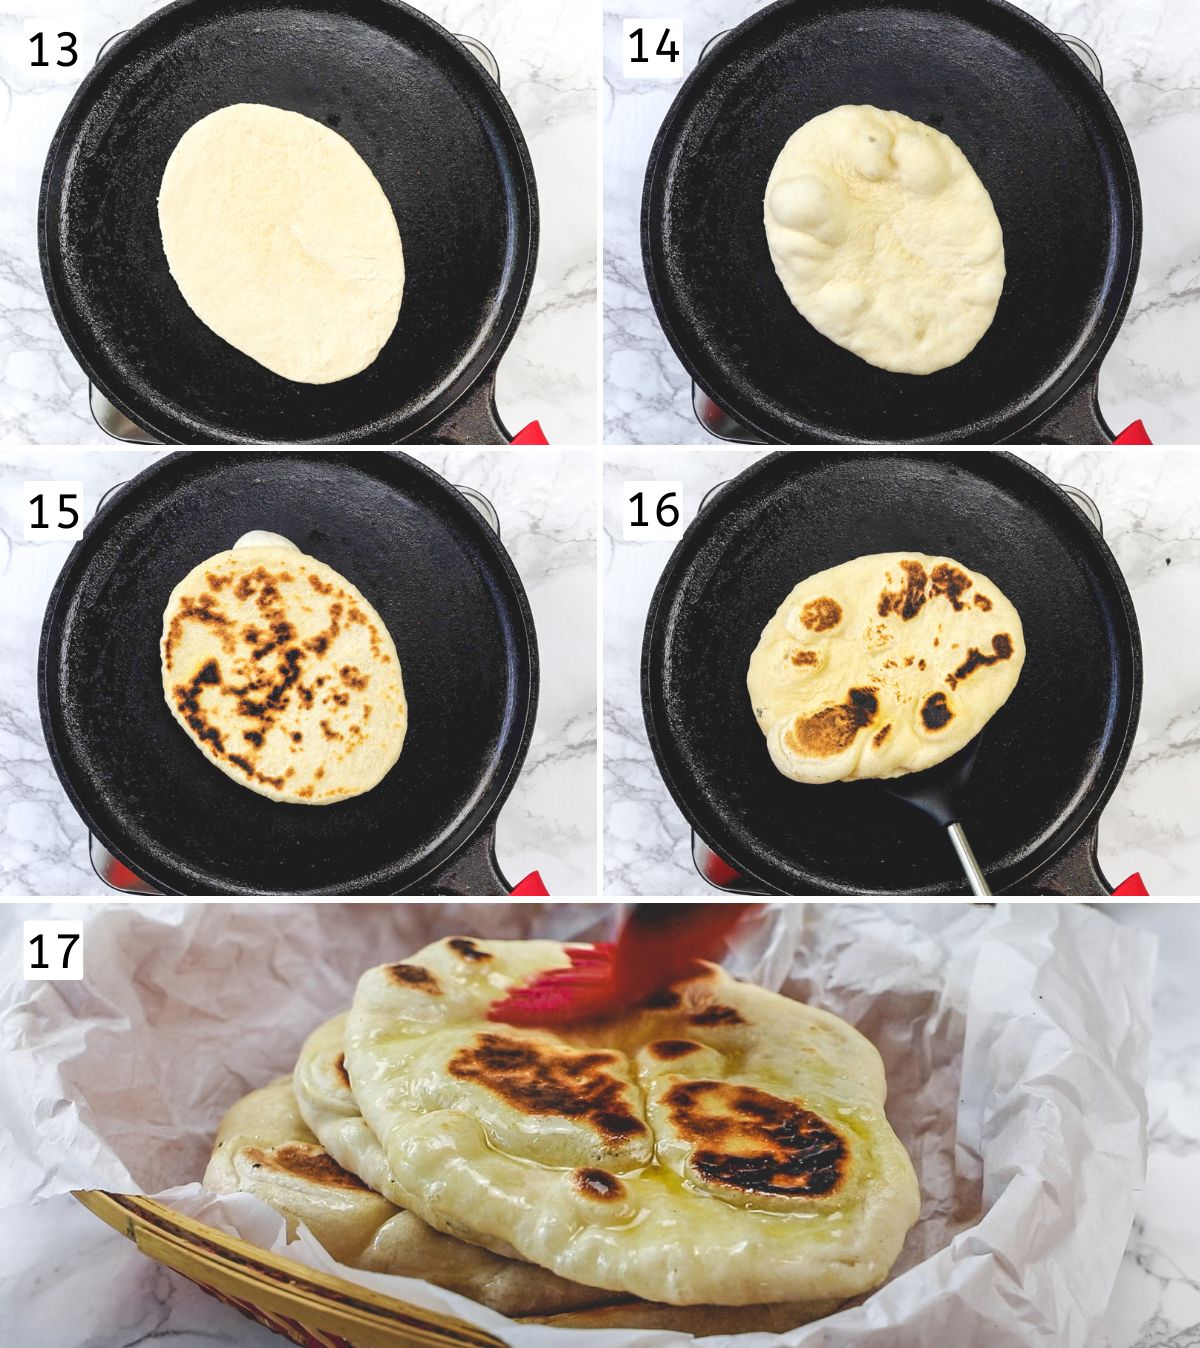 Collage of 6 images showing cooking naan on stove top and applying butter.